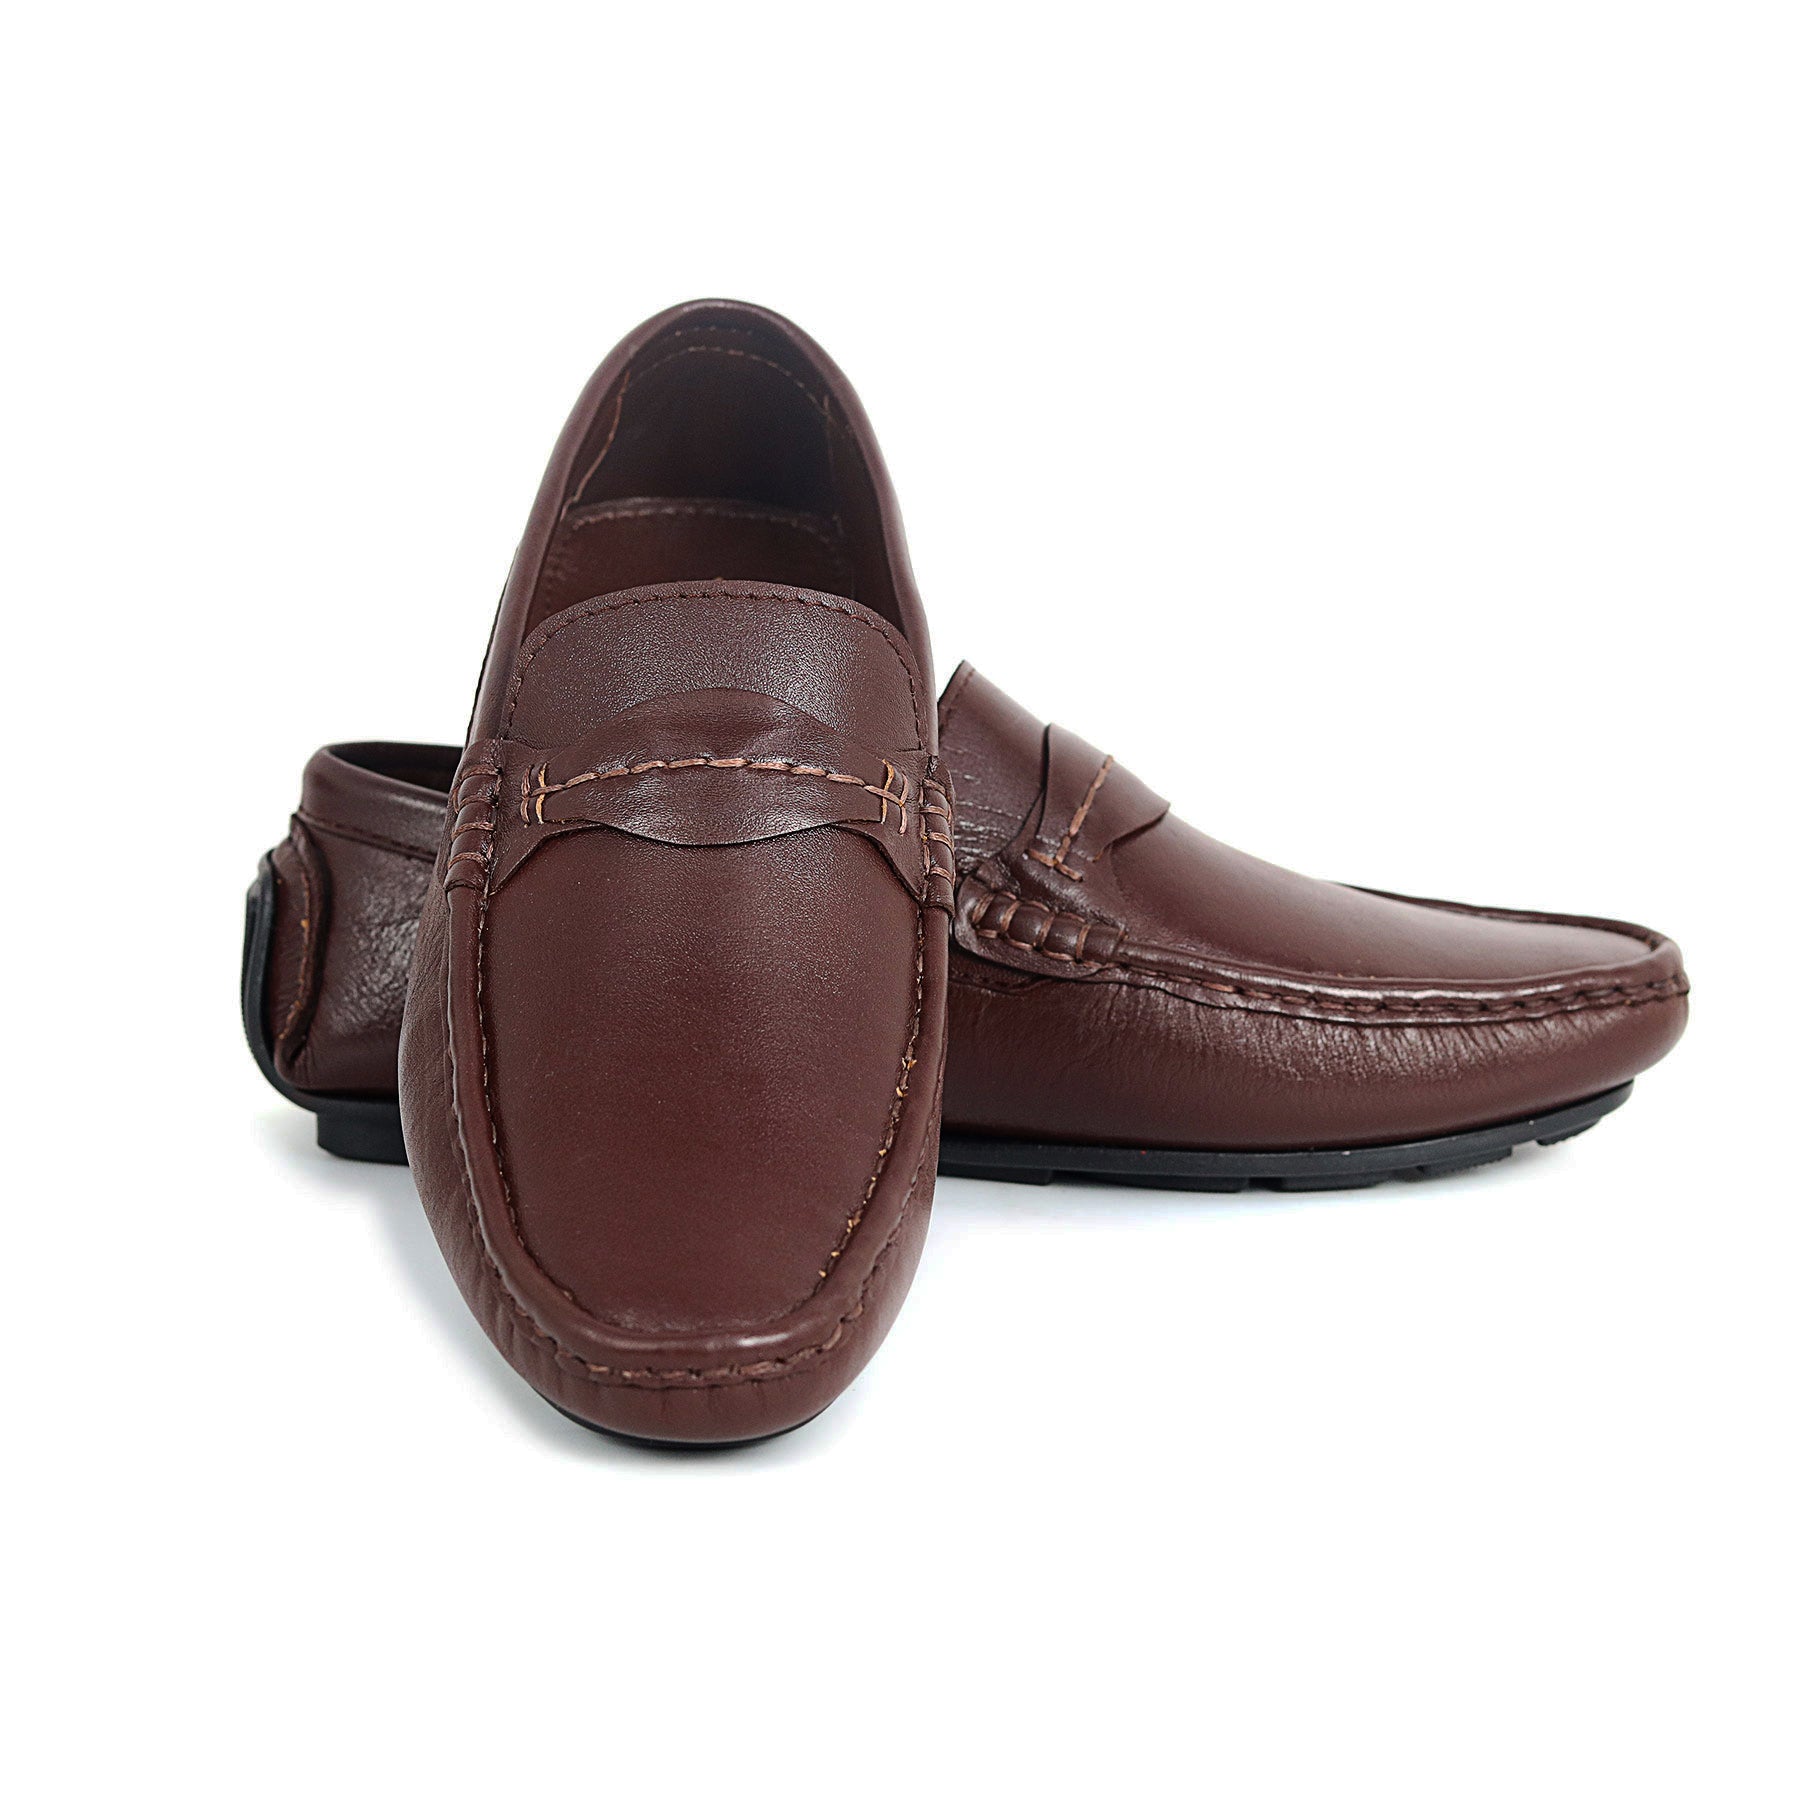 Zays Leather Loafer Shoe For Men (Chocolate) - ZAYSSF36